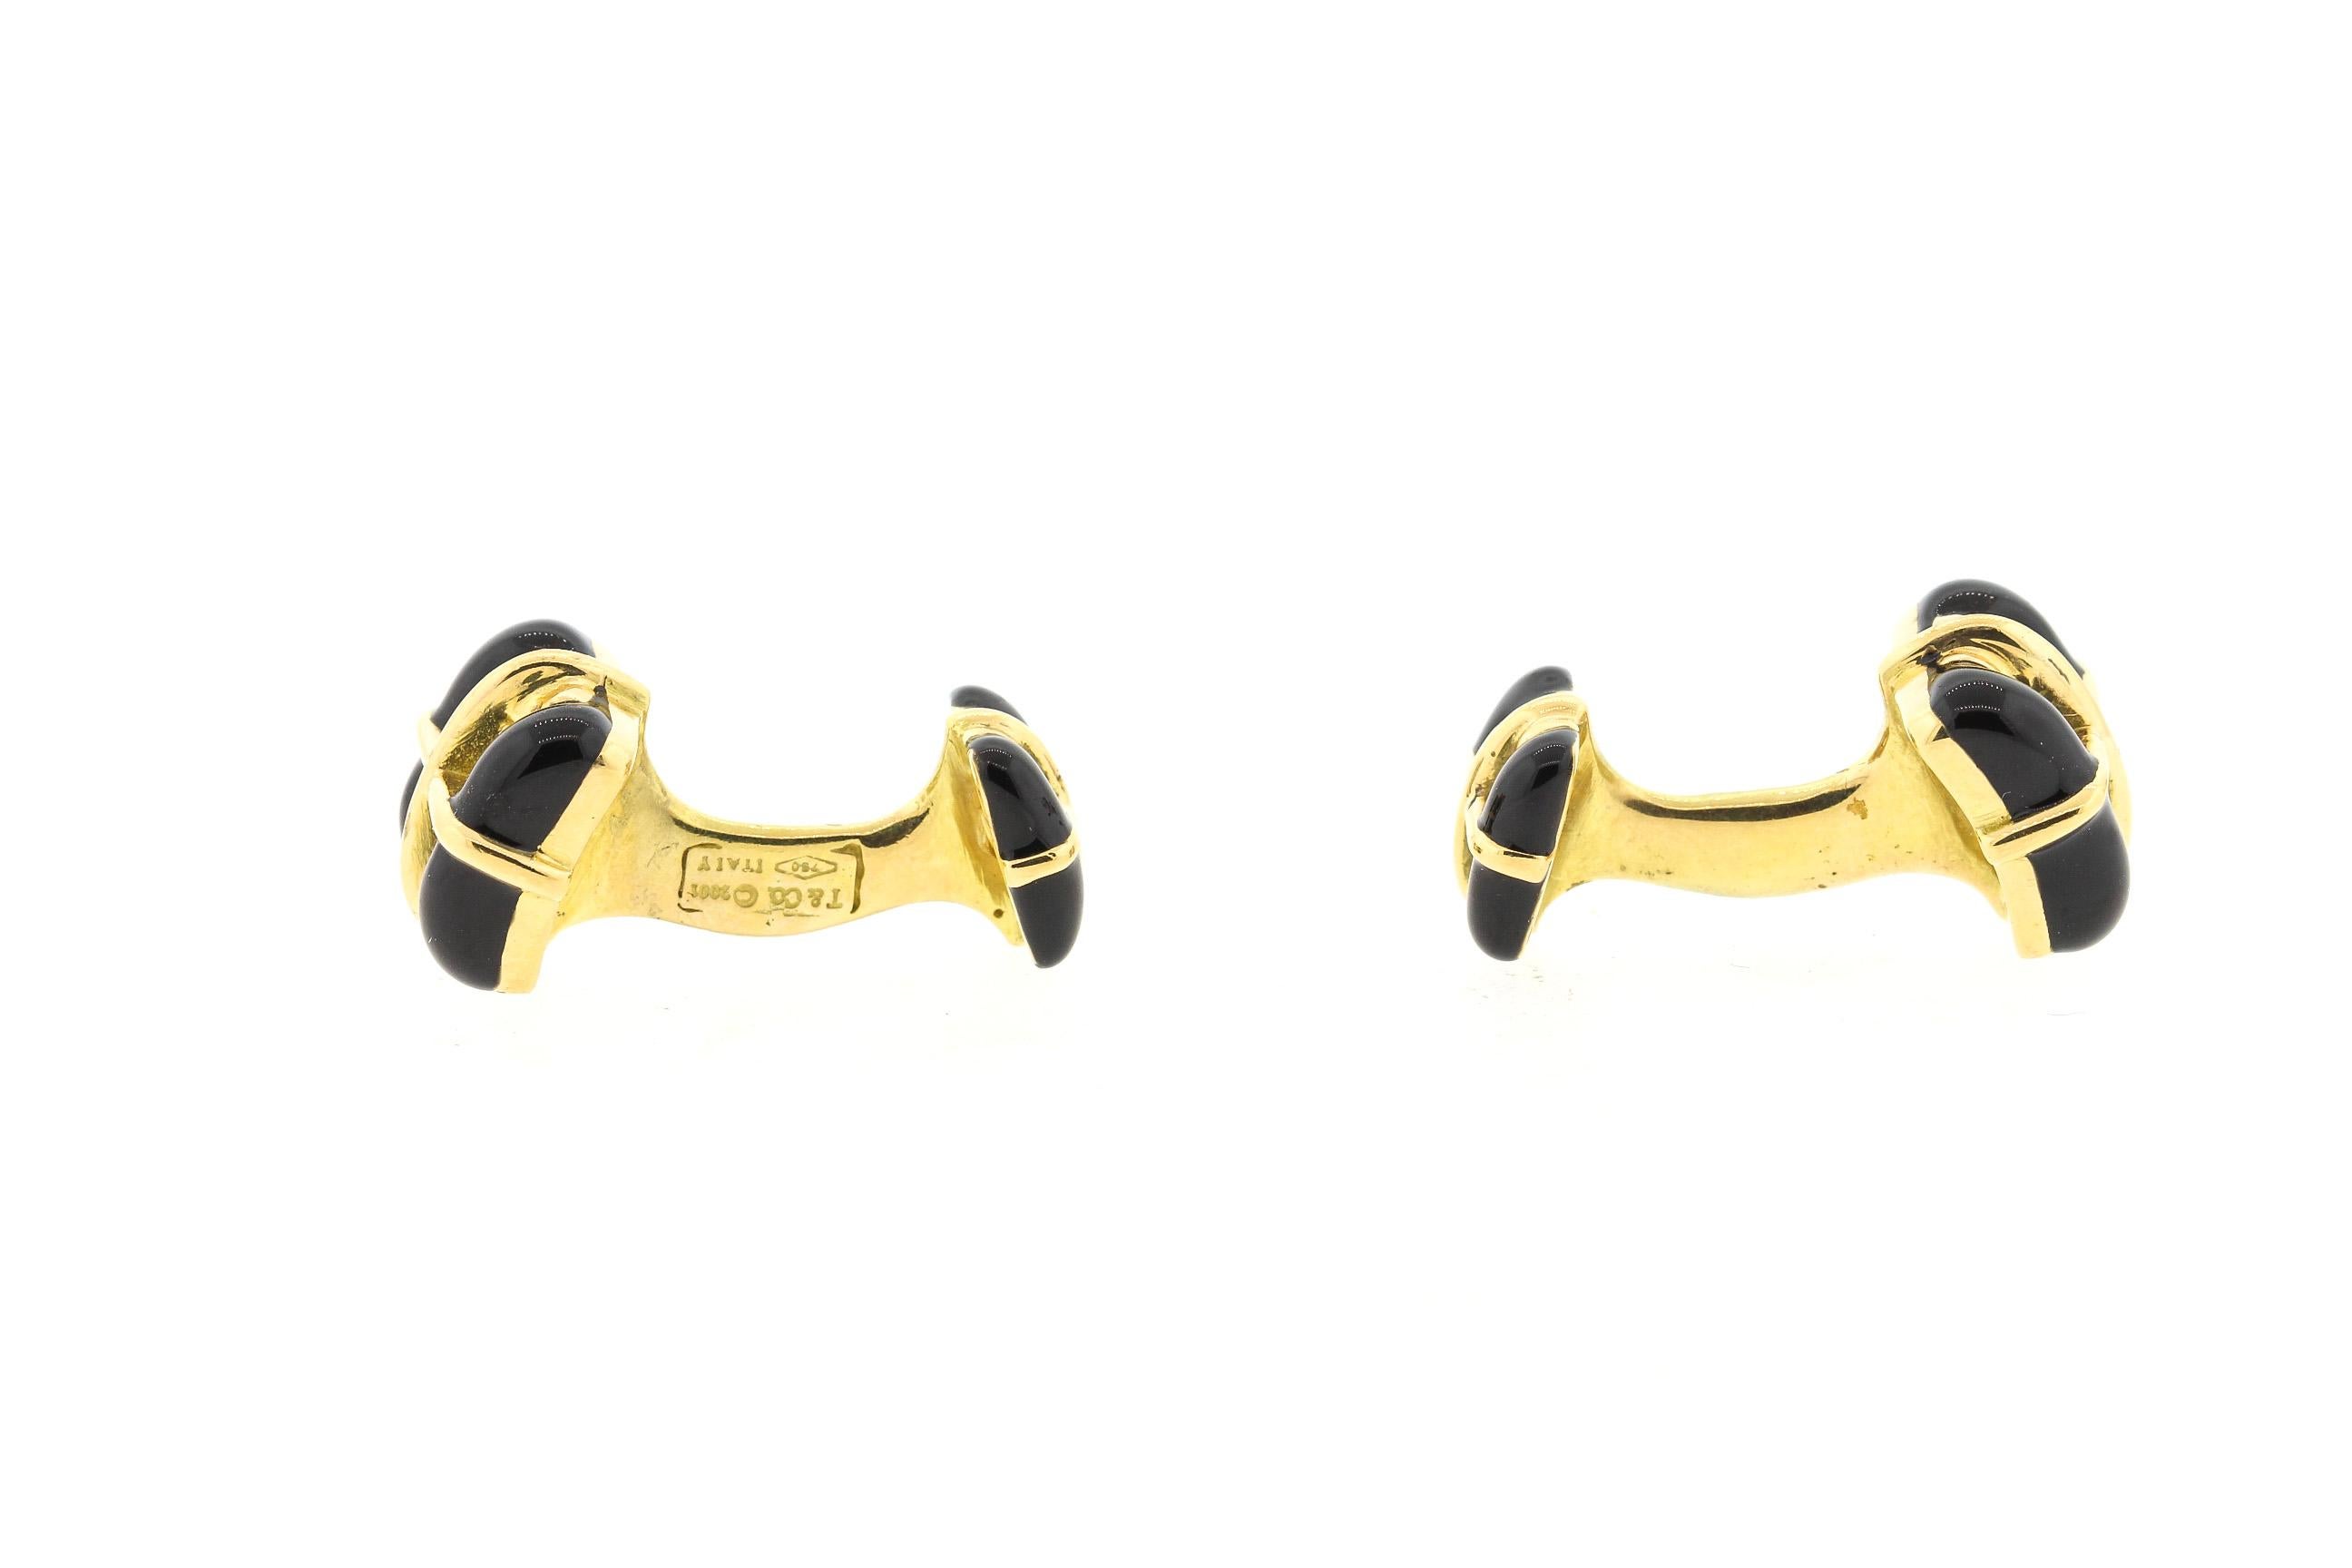 A pair of vintage 18k yellow gold black enamel square cufflinks by Tiffany & Co., made in 2001. These double sided cufflinks are distinguished and wearable by both men and women. They are stamped T&Co. 750 and Italy with the year 2001. They are 1